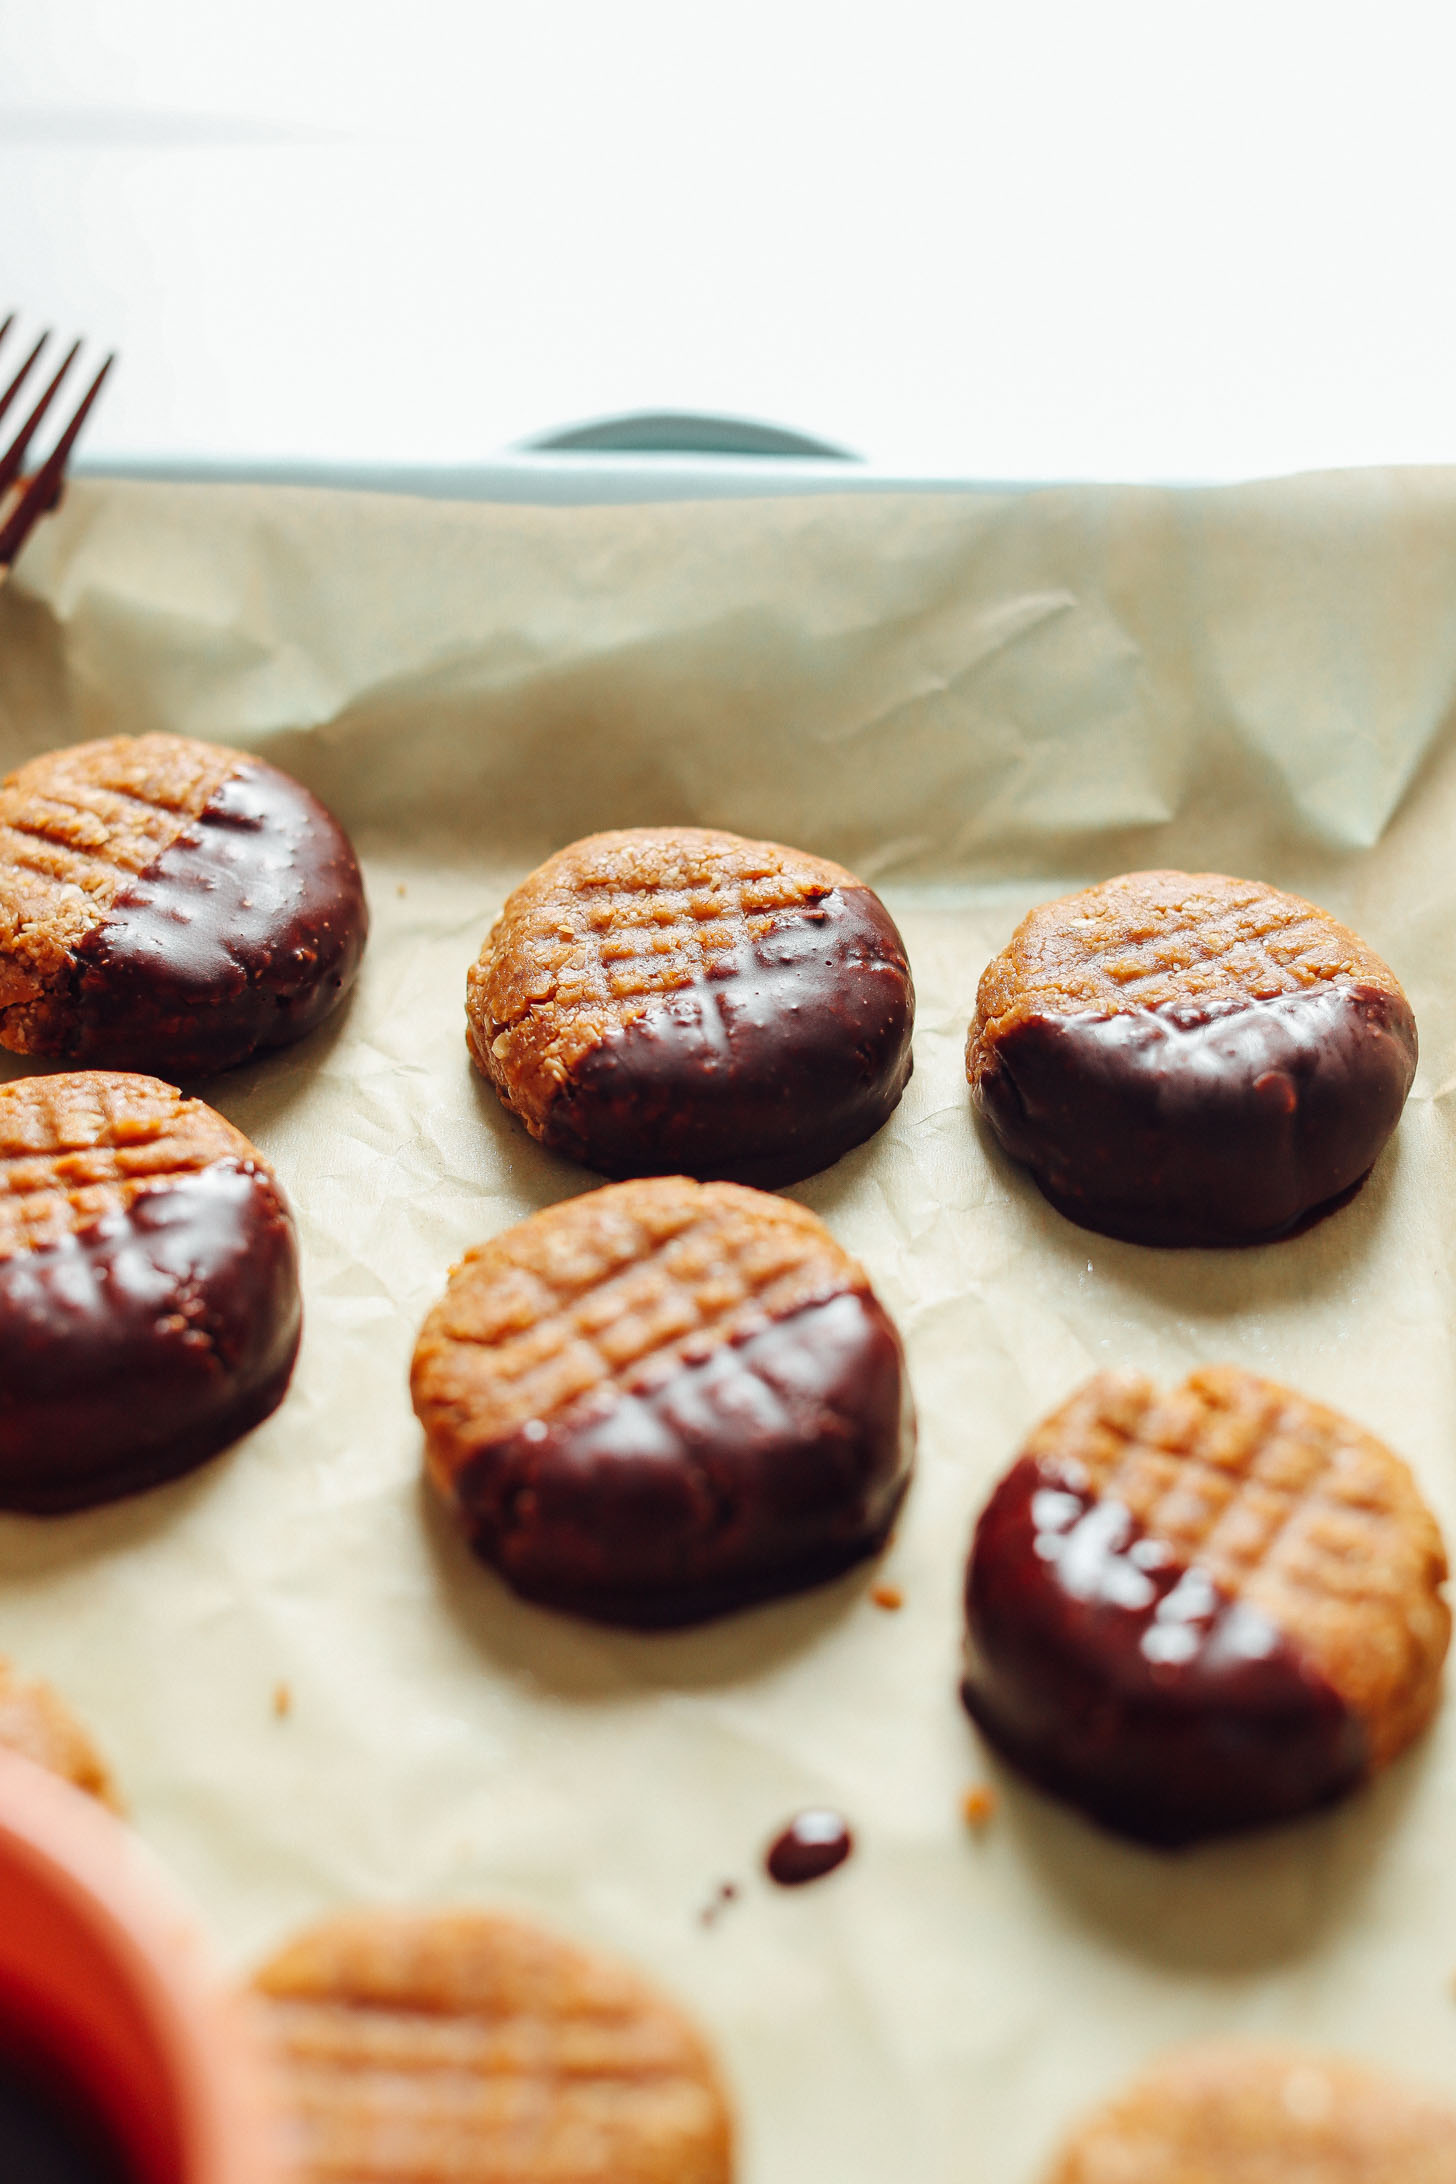 Parchment-lined baking sheet with chocolate-dipped gluten-free peanut butter cookies